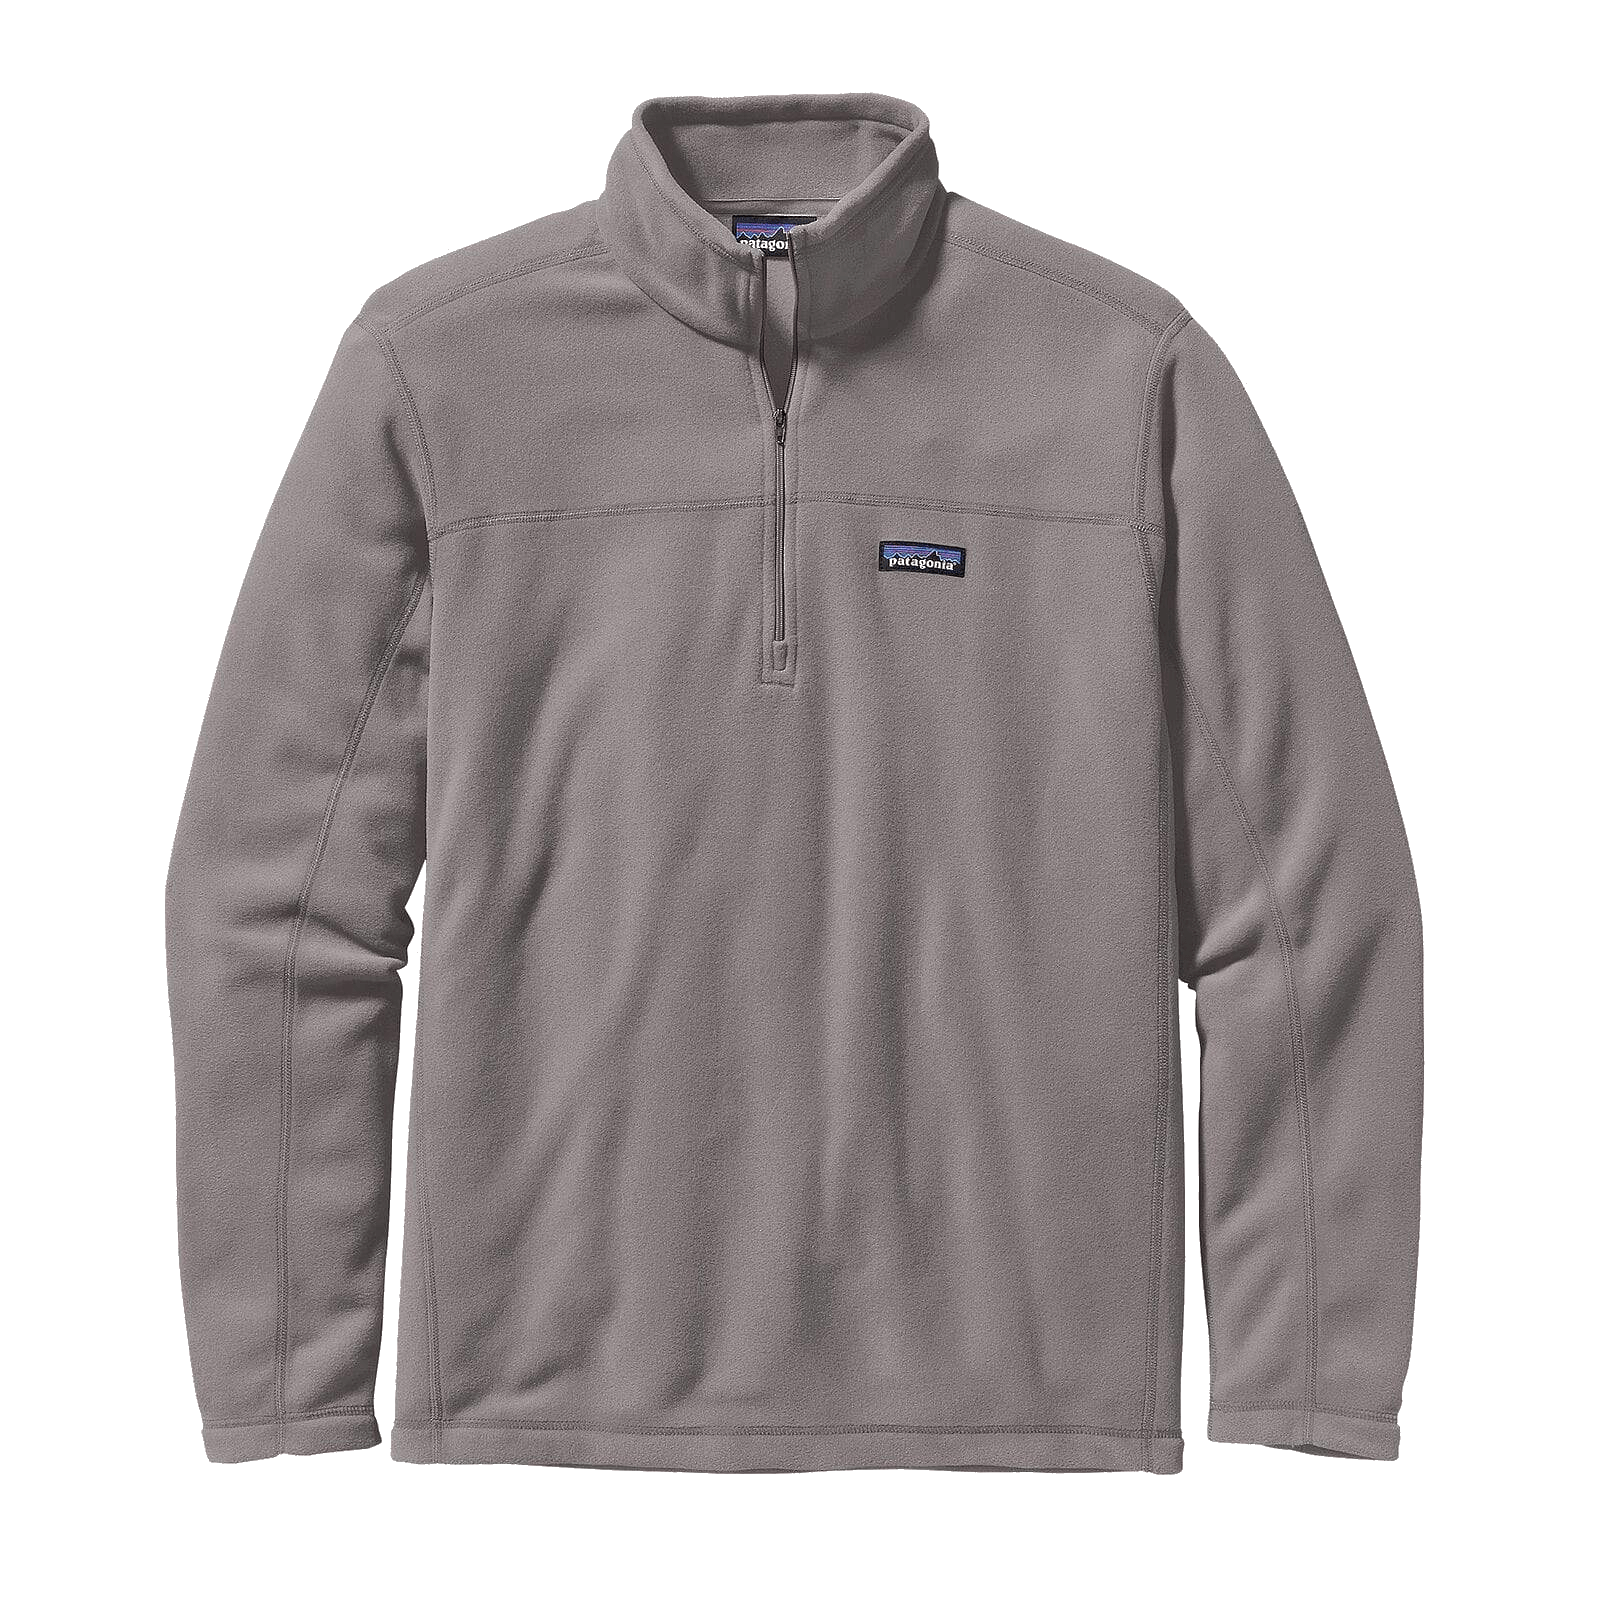 Patagonia Fleece XS / Feather Grey Patagonia - Men's Micro D® Pullover